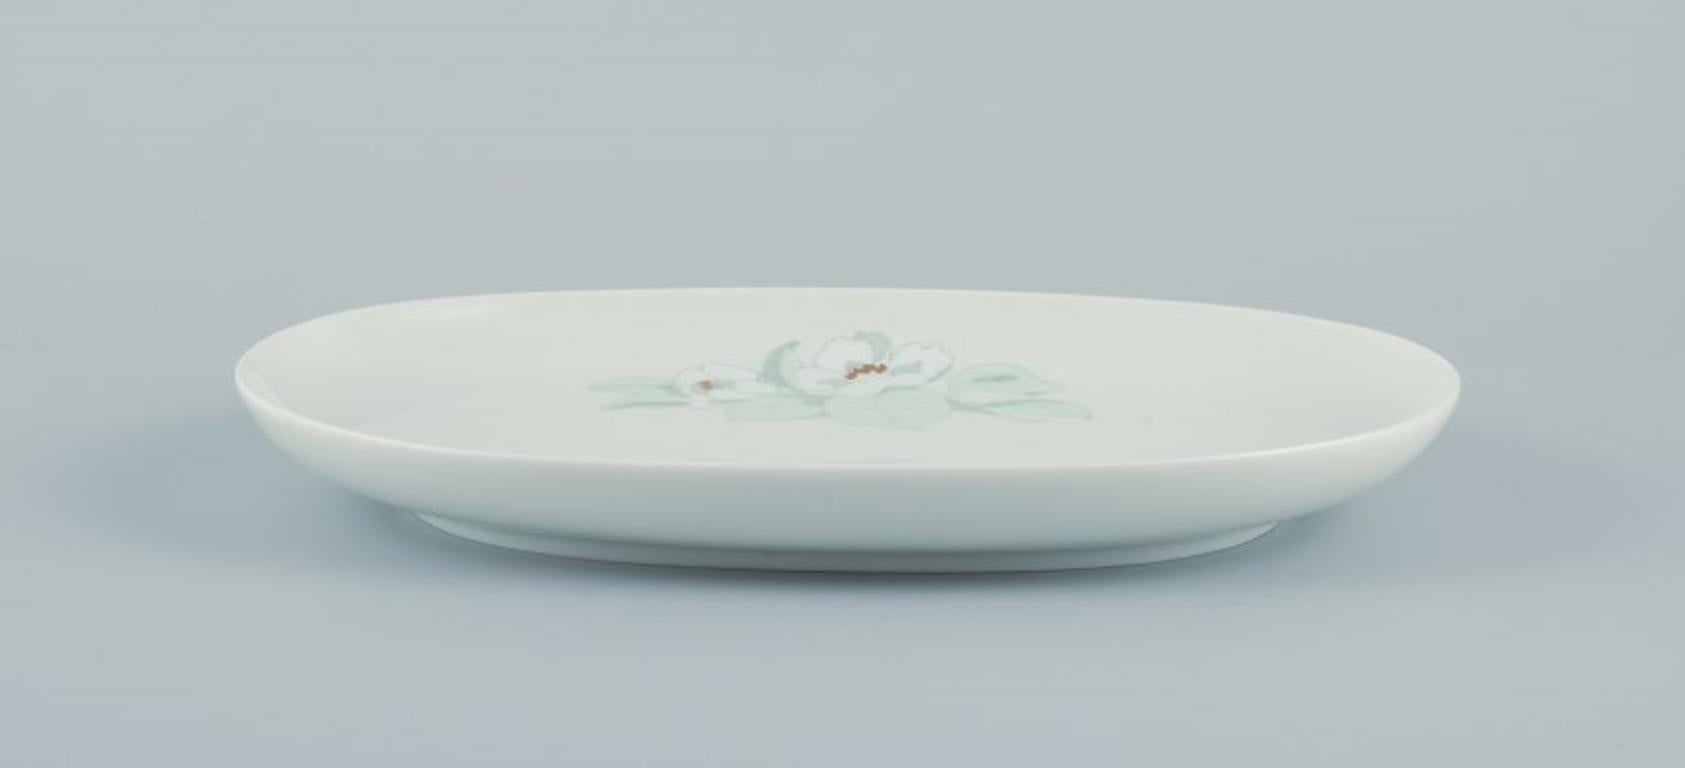 Porcelain Tapio Wirkkala for Rosenthal Studio-linie. Two oval dishes with a flower motif. For Sale